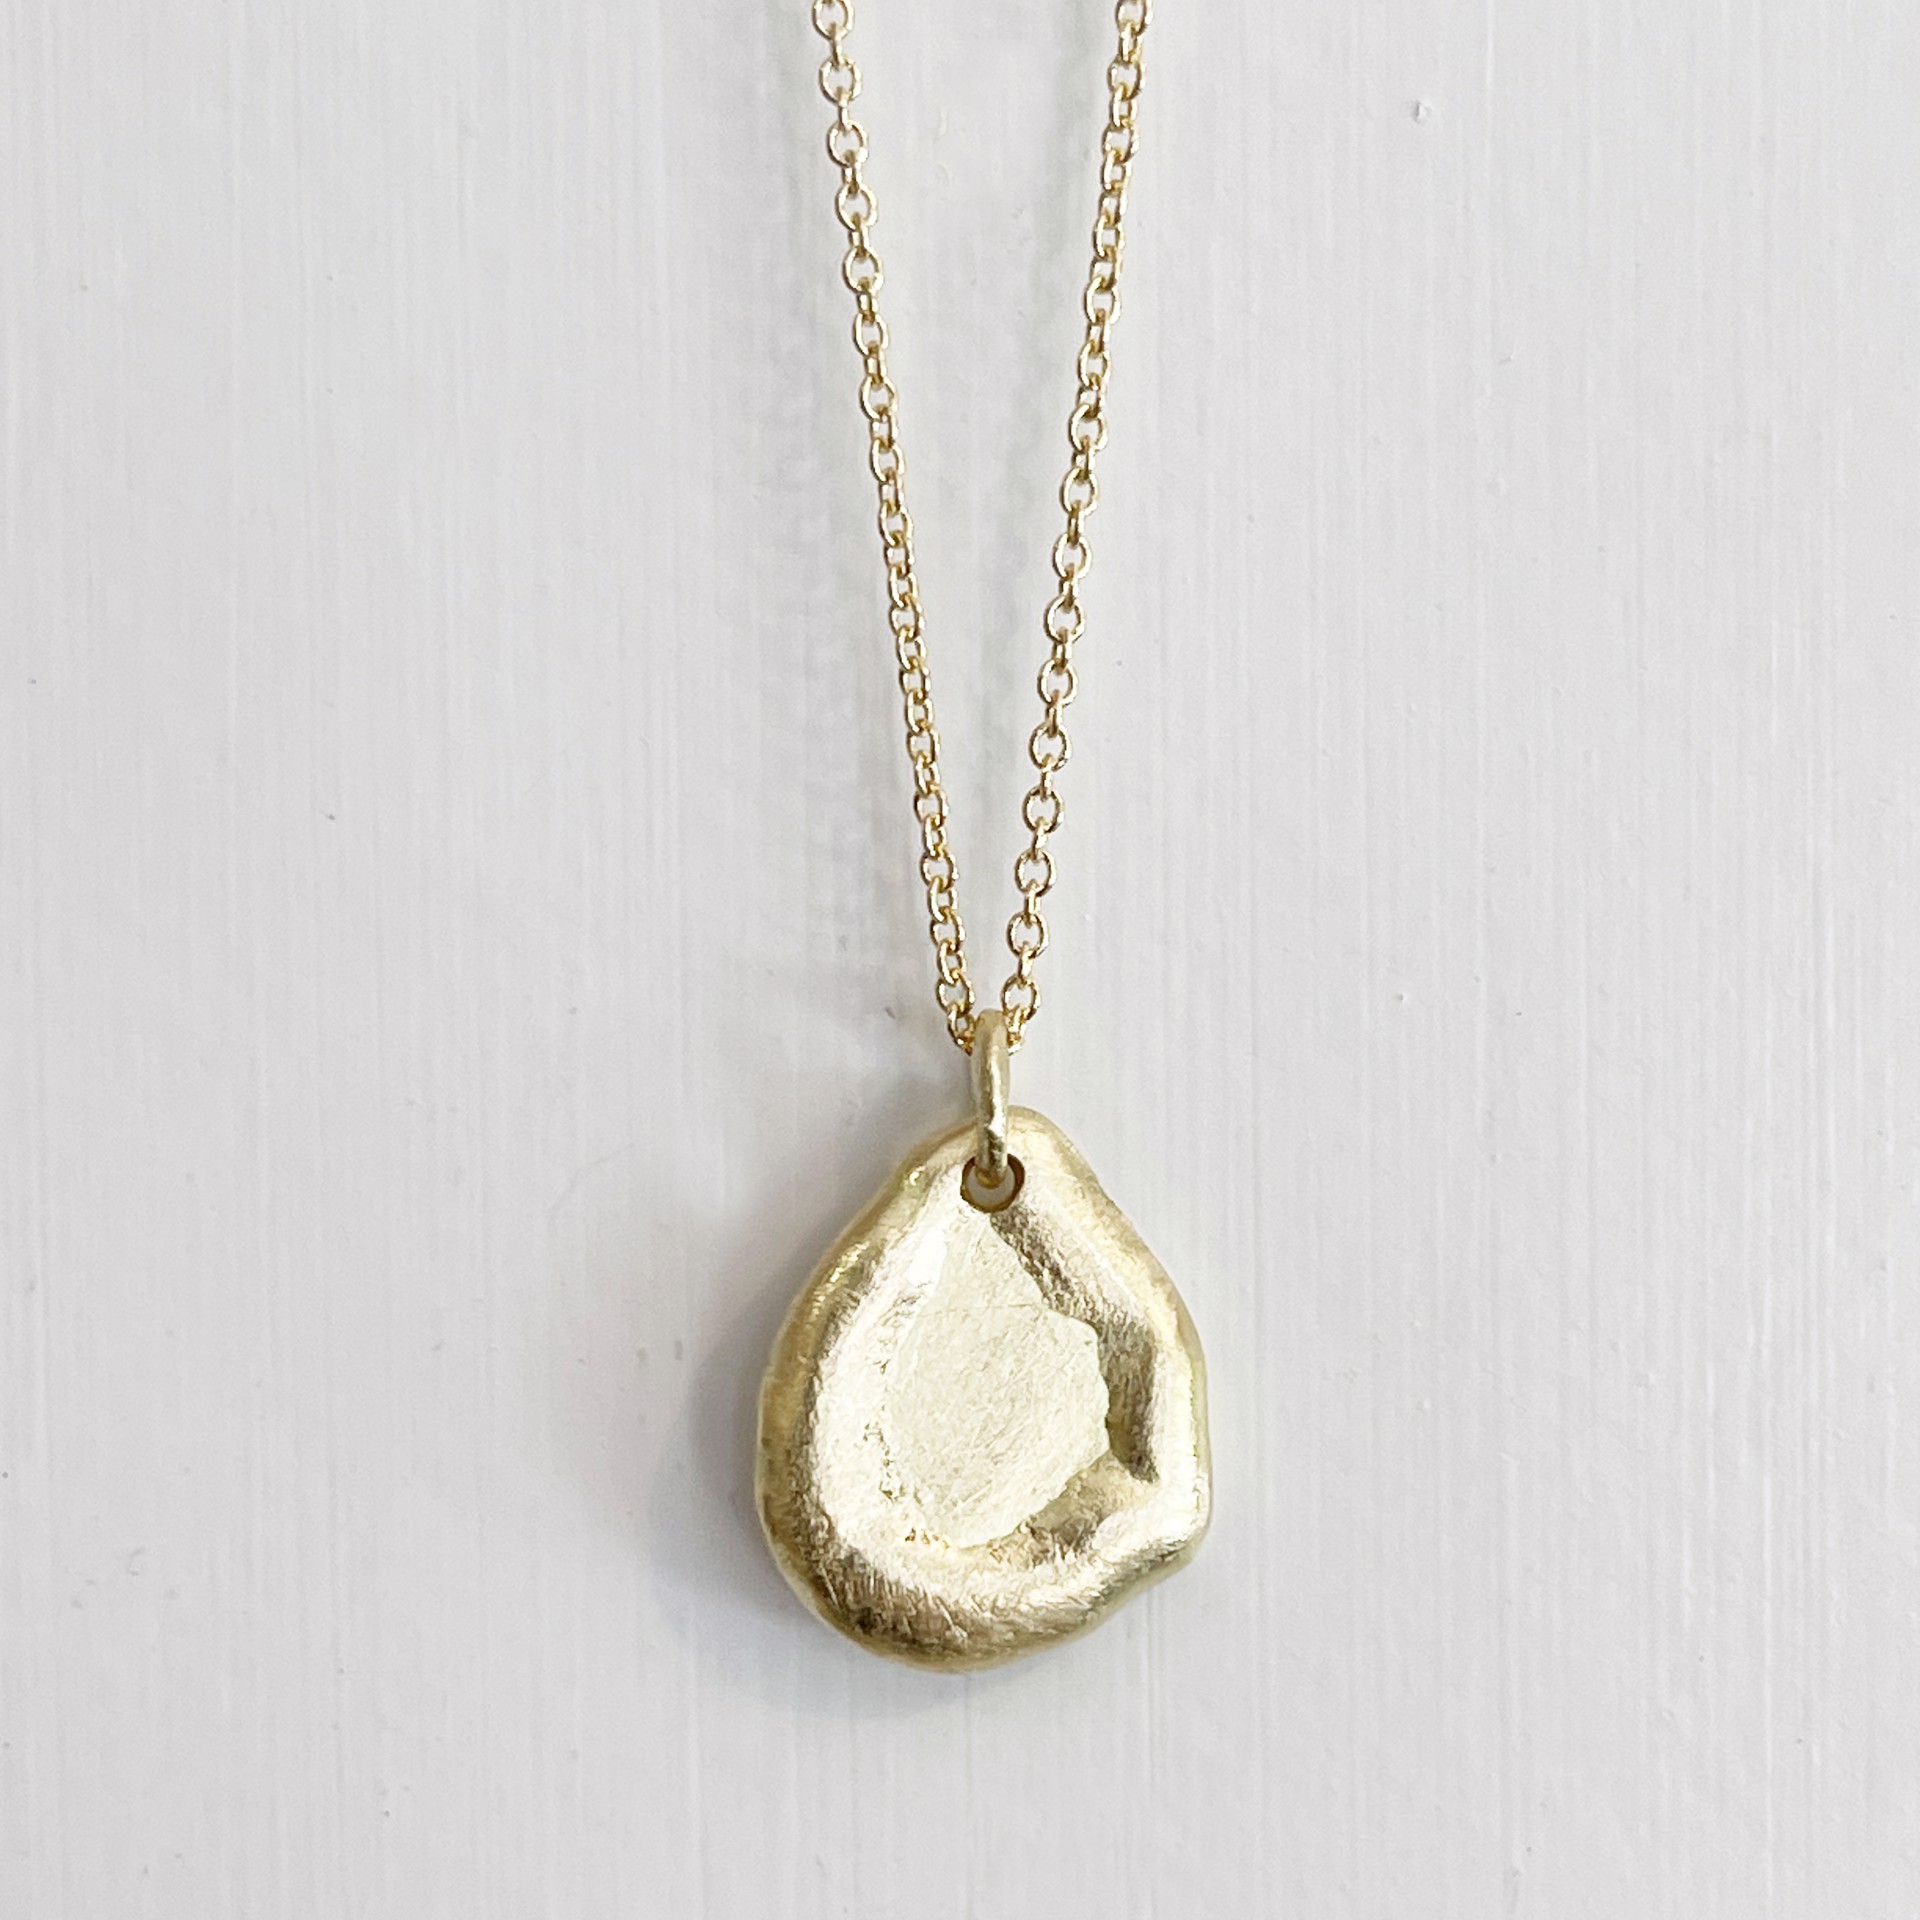 LHN19- Melted Teardrop Pendant on Cable Chain 18" 18k Gold by Leandra Hill